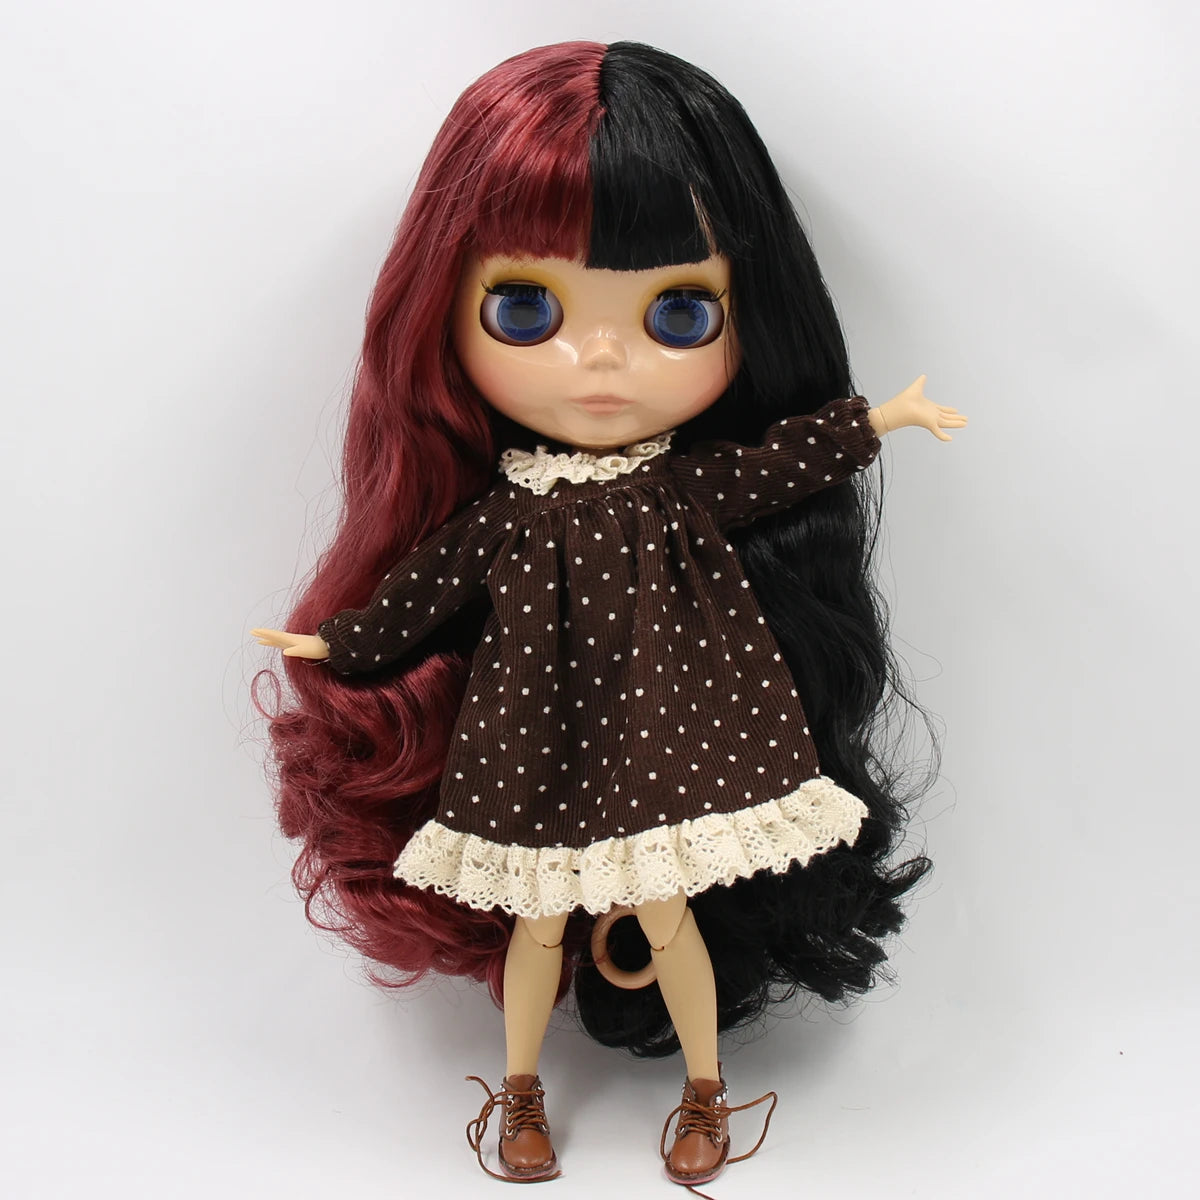 ICY DBS Blyth Doll 1/6 BJD Toy Joint Body Special Offer